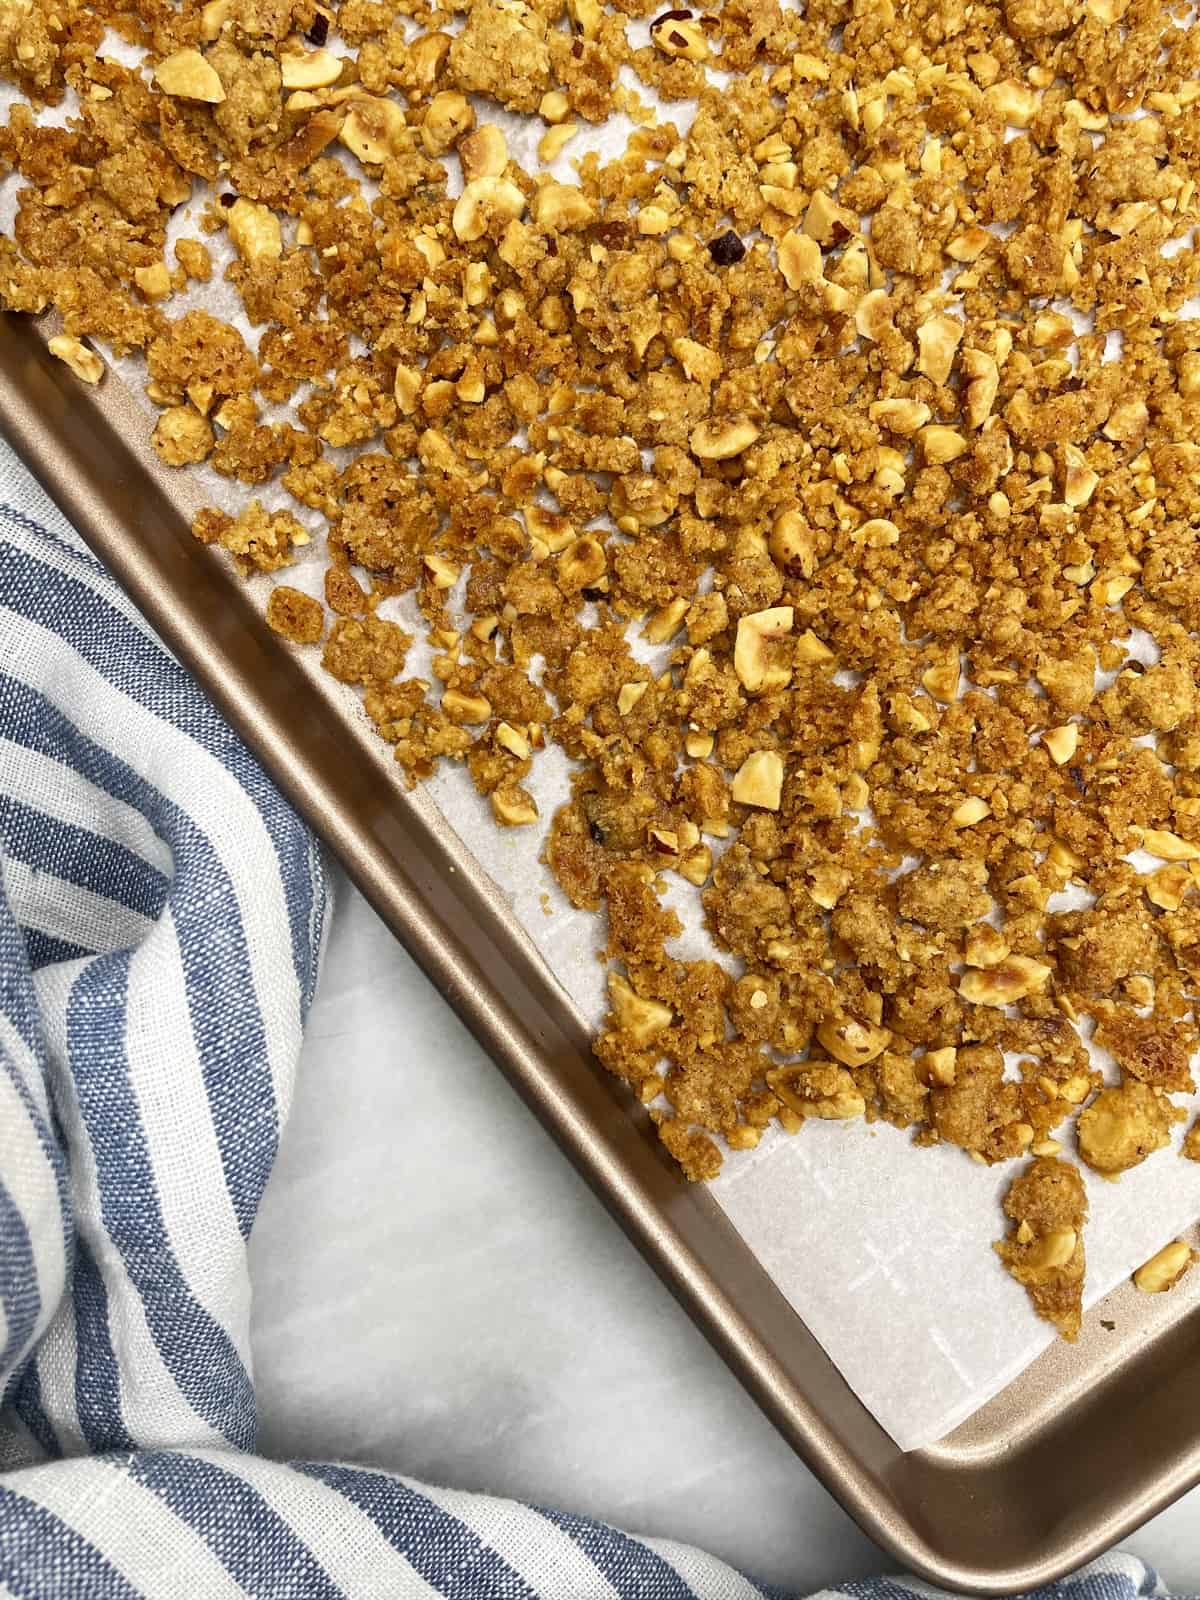 Baked crumble topping on a baking sheet